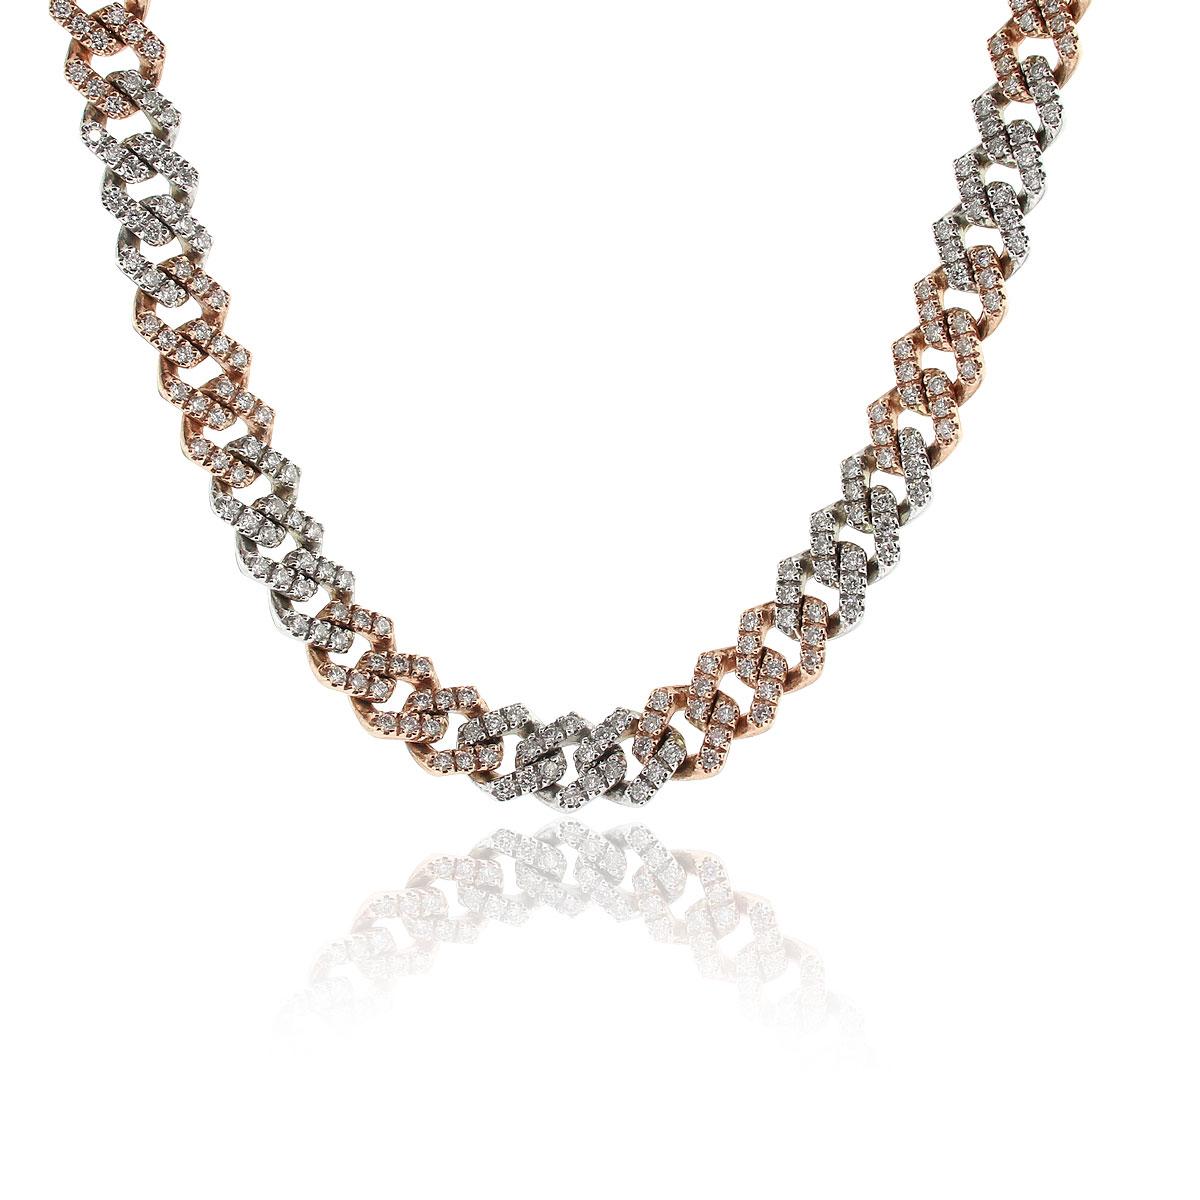 Style: 14k Two Tone 13.03ctw Diamond Pave Cuban Chain Necklace
Material: 14k white gold & 14k rose gold
Stone Details: Approx. 13.03ctw of round cut diamonds. Diamonds are G/H in color and VS in clarity
Weight: 78.5g (50.5dwt)
Measurements: 19